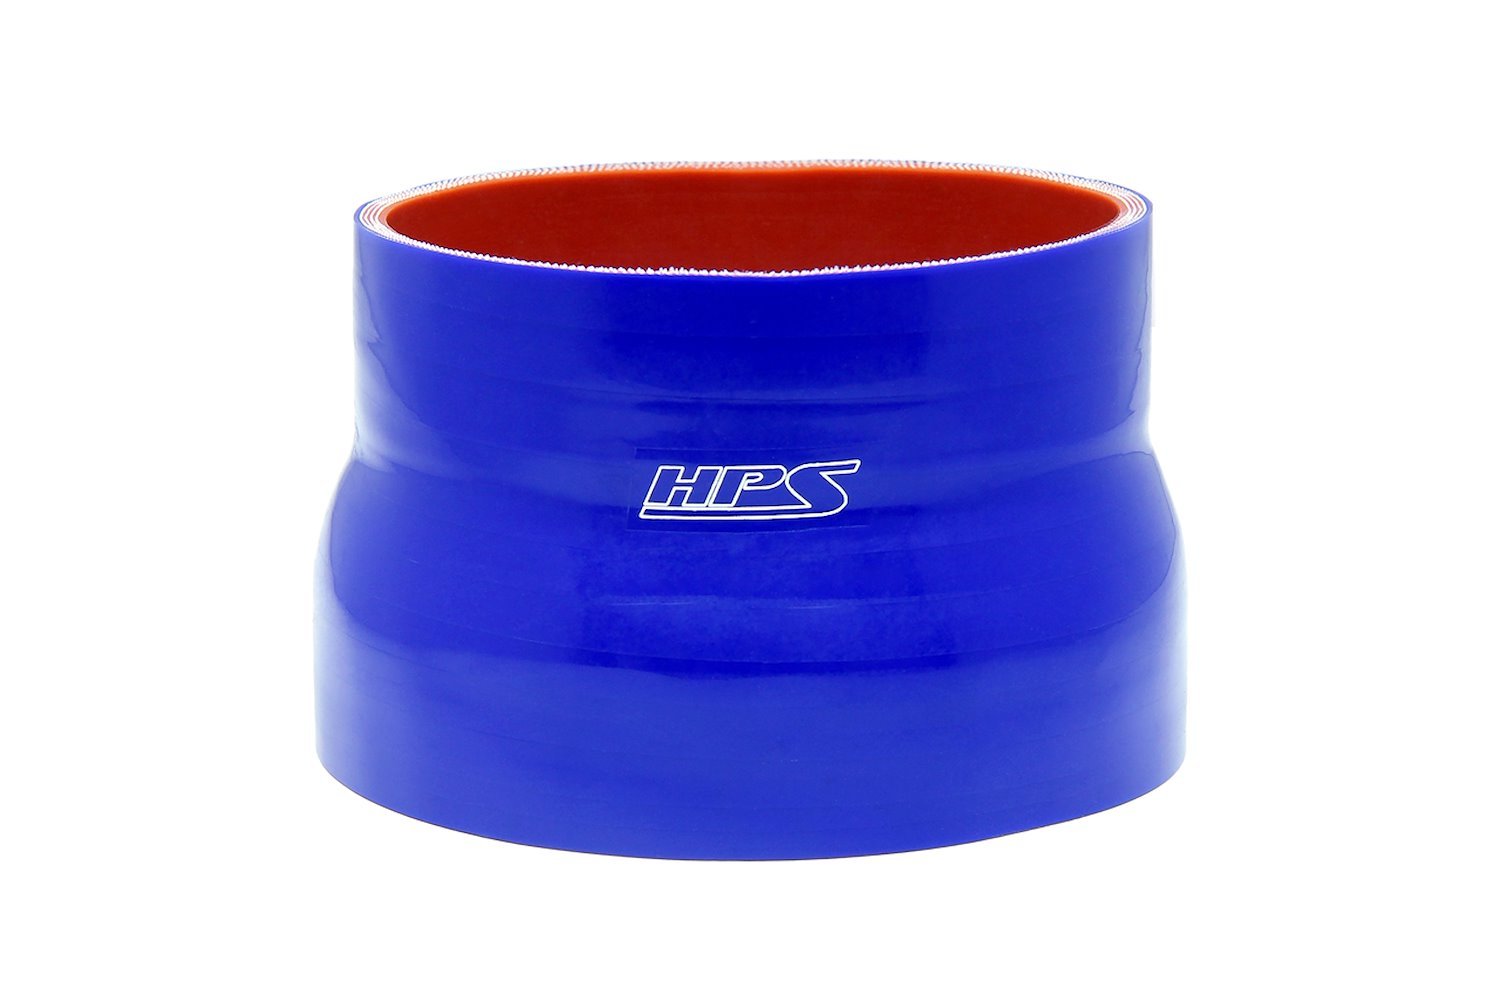 HTSR-400-425-L4-BLUE Silicone Reducer Hose, High-Temp 4-Ply Reinforced, 4 in. - 4-1/4 in. ID, 4 in. Long, Blue